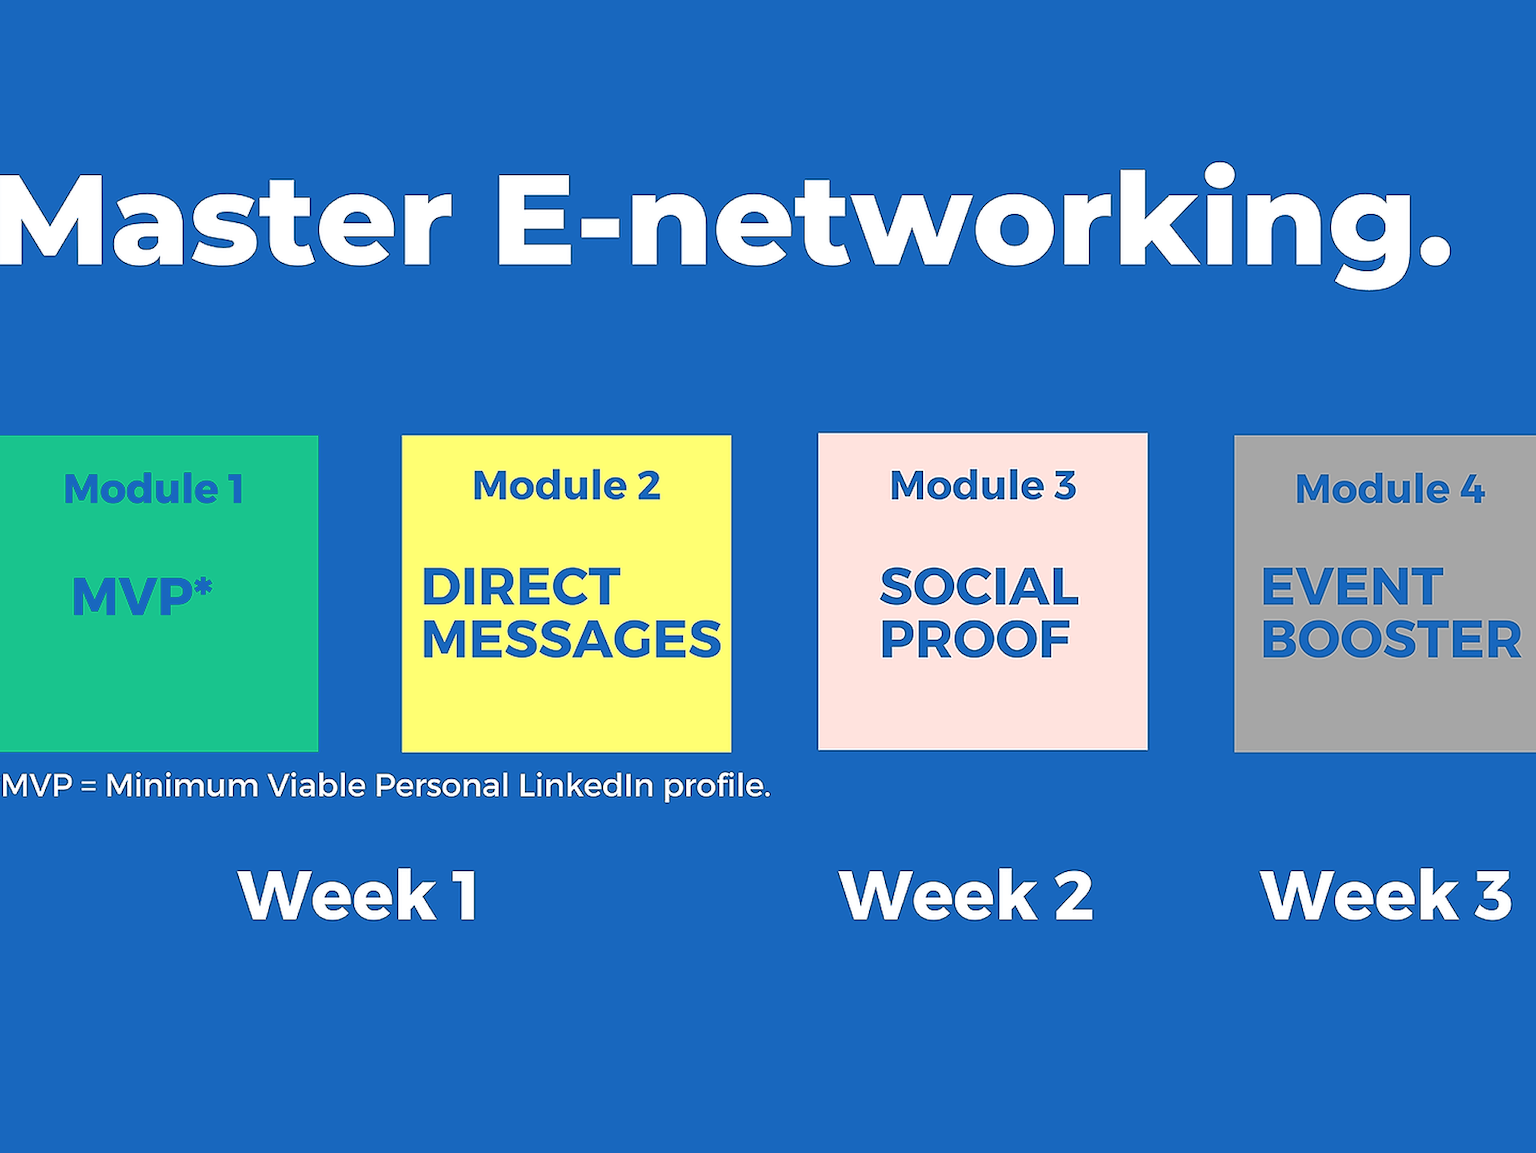 Master E-networking in four steps